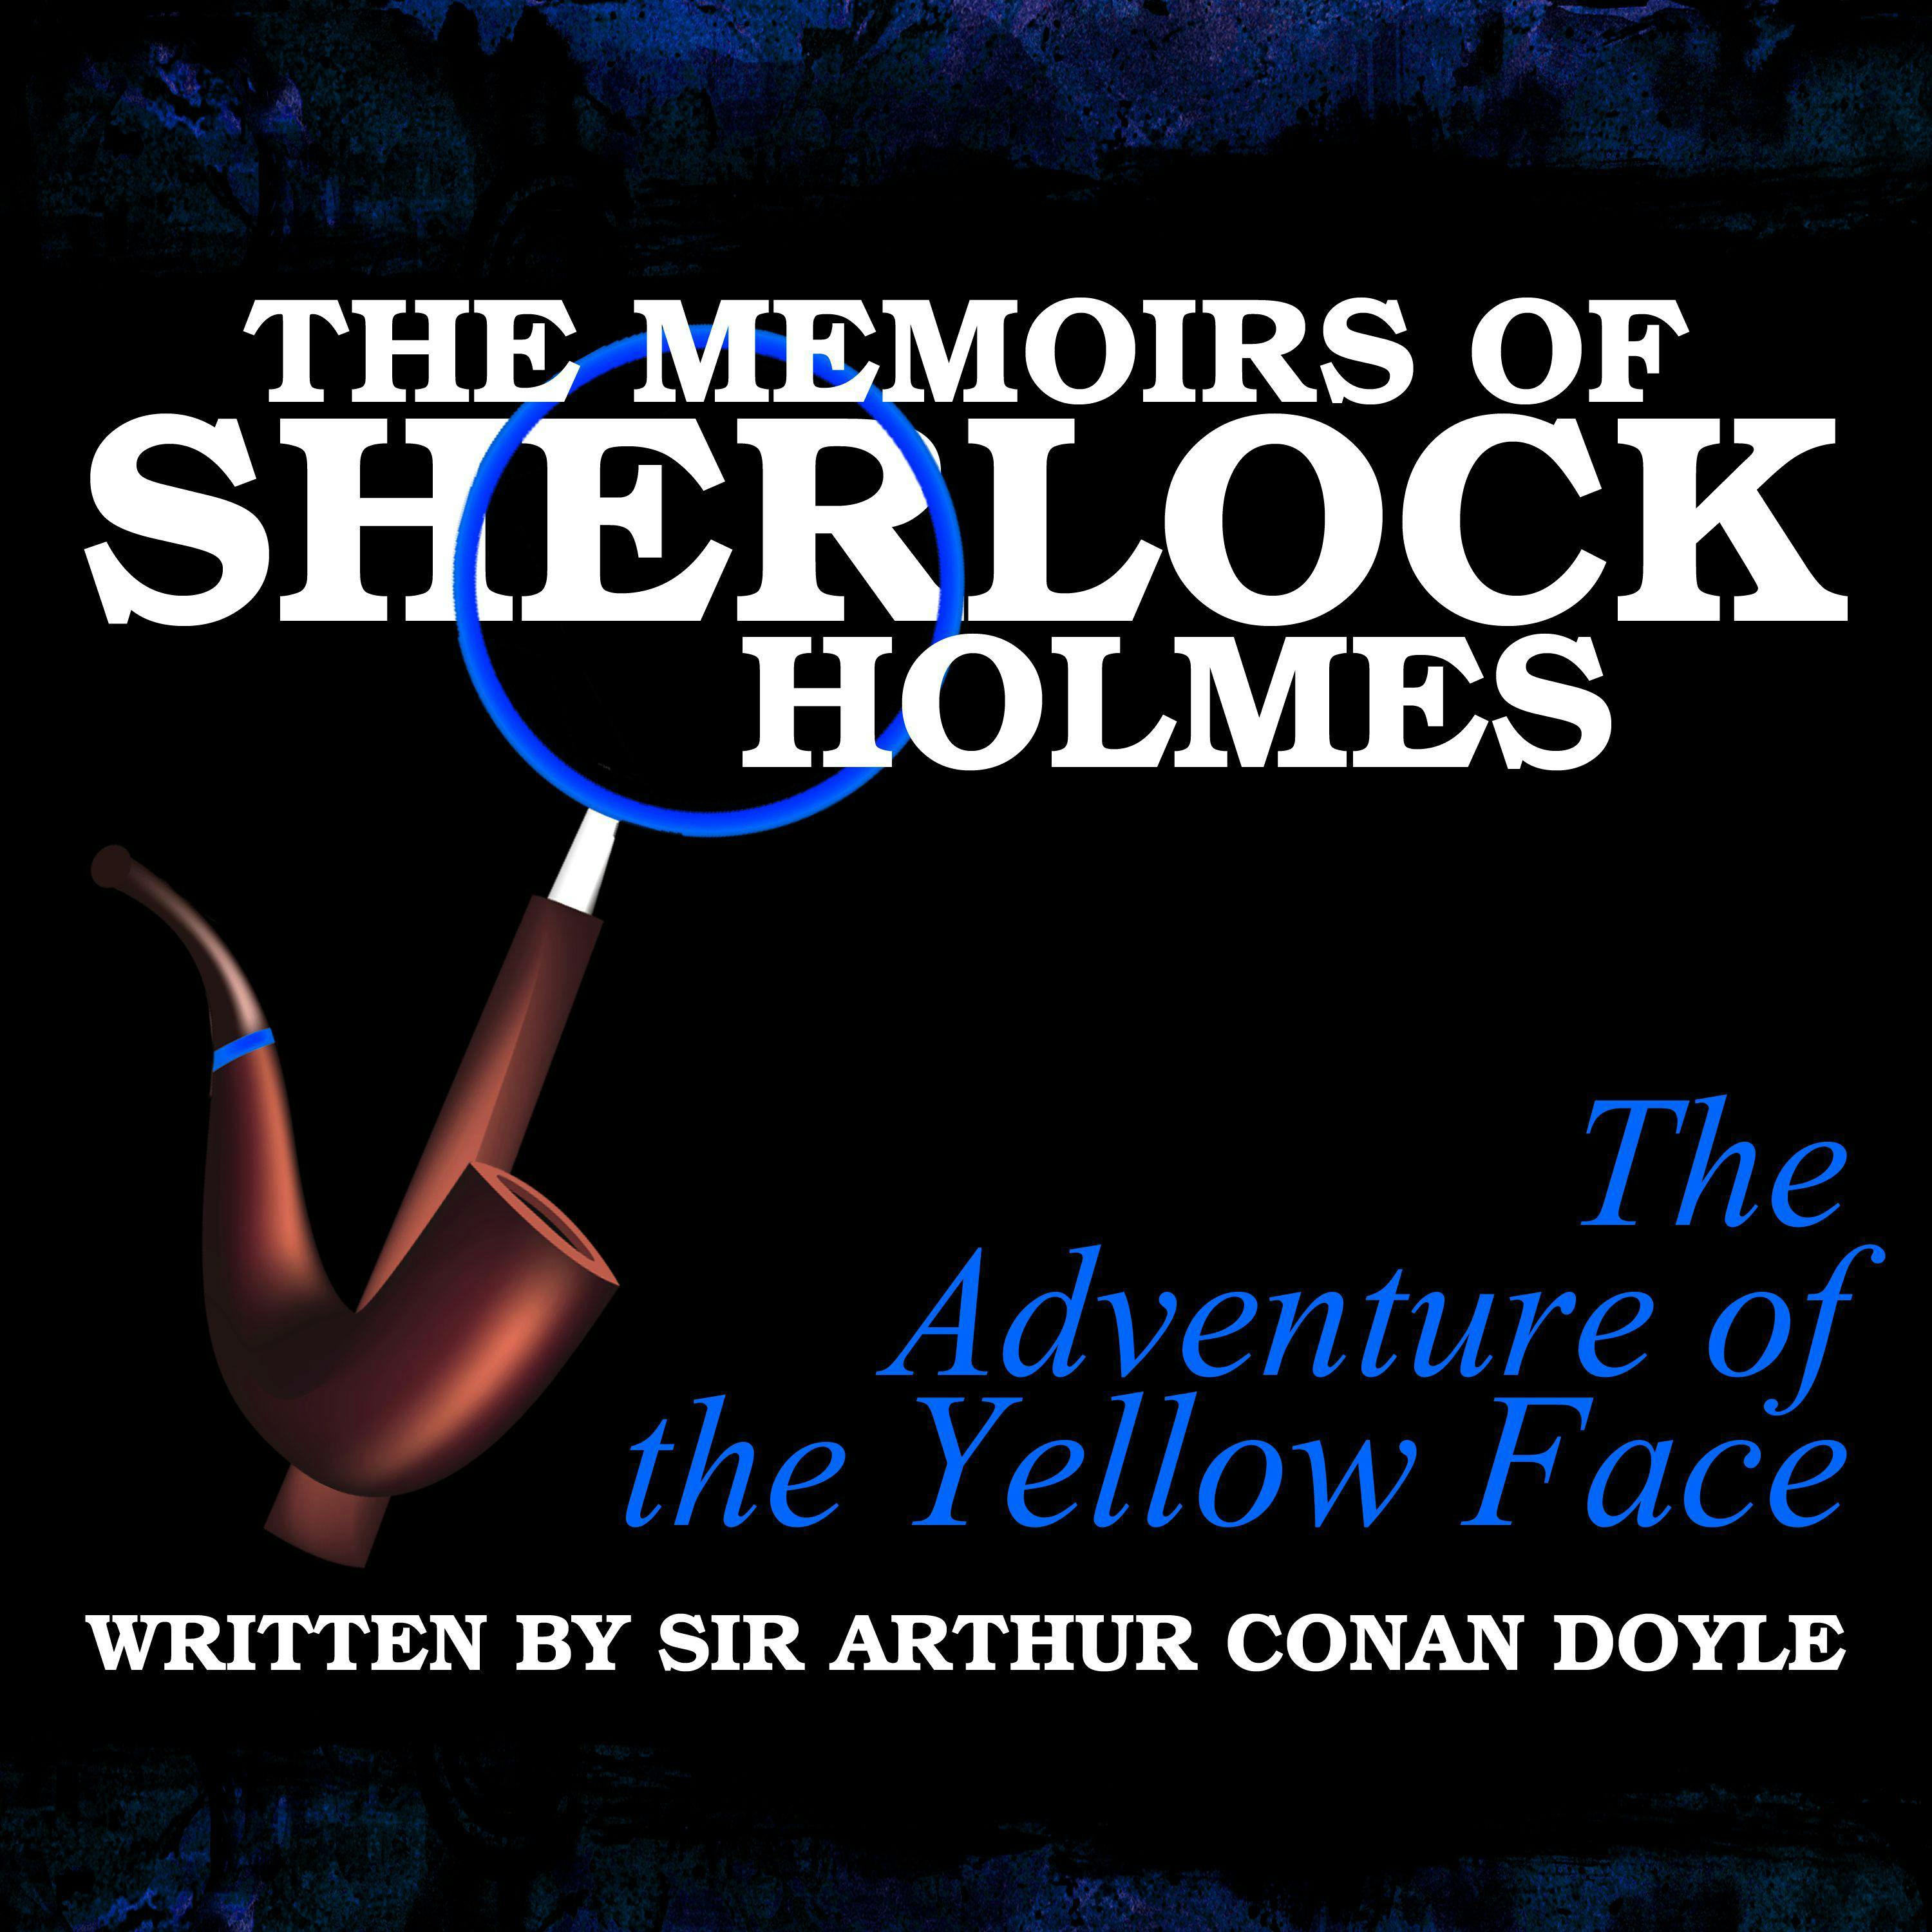 The Memoirs of Sherlock Holmes: The Adventure of the Yellow Face - undefined